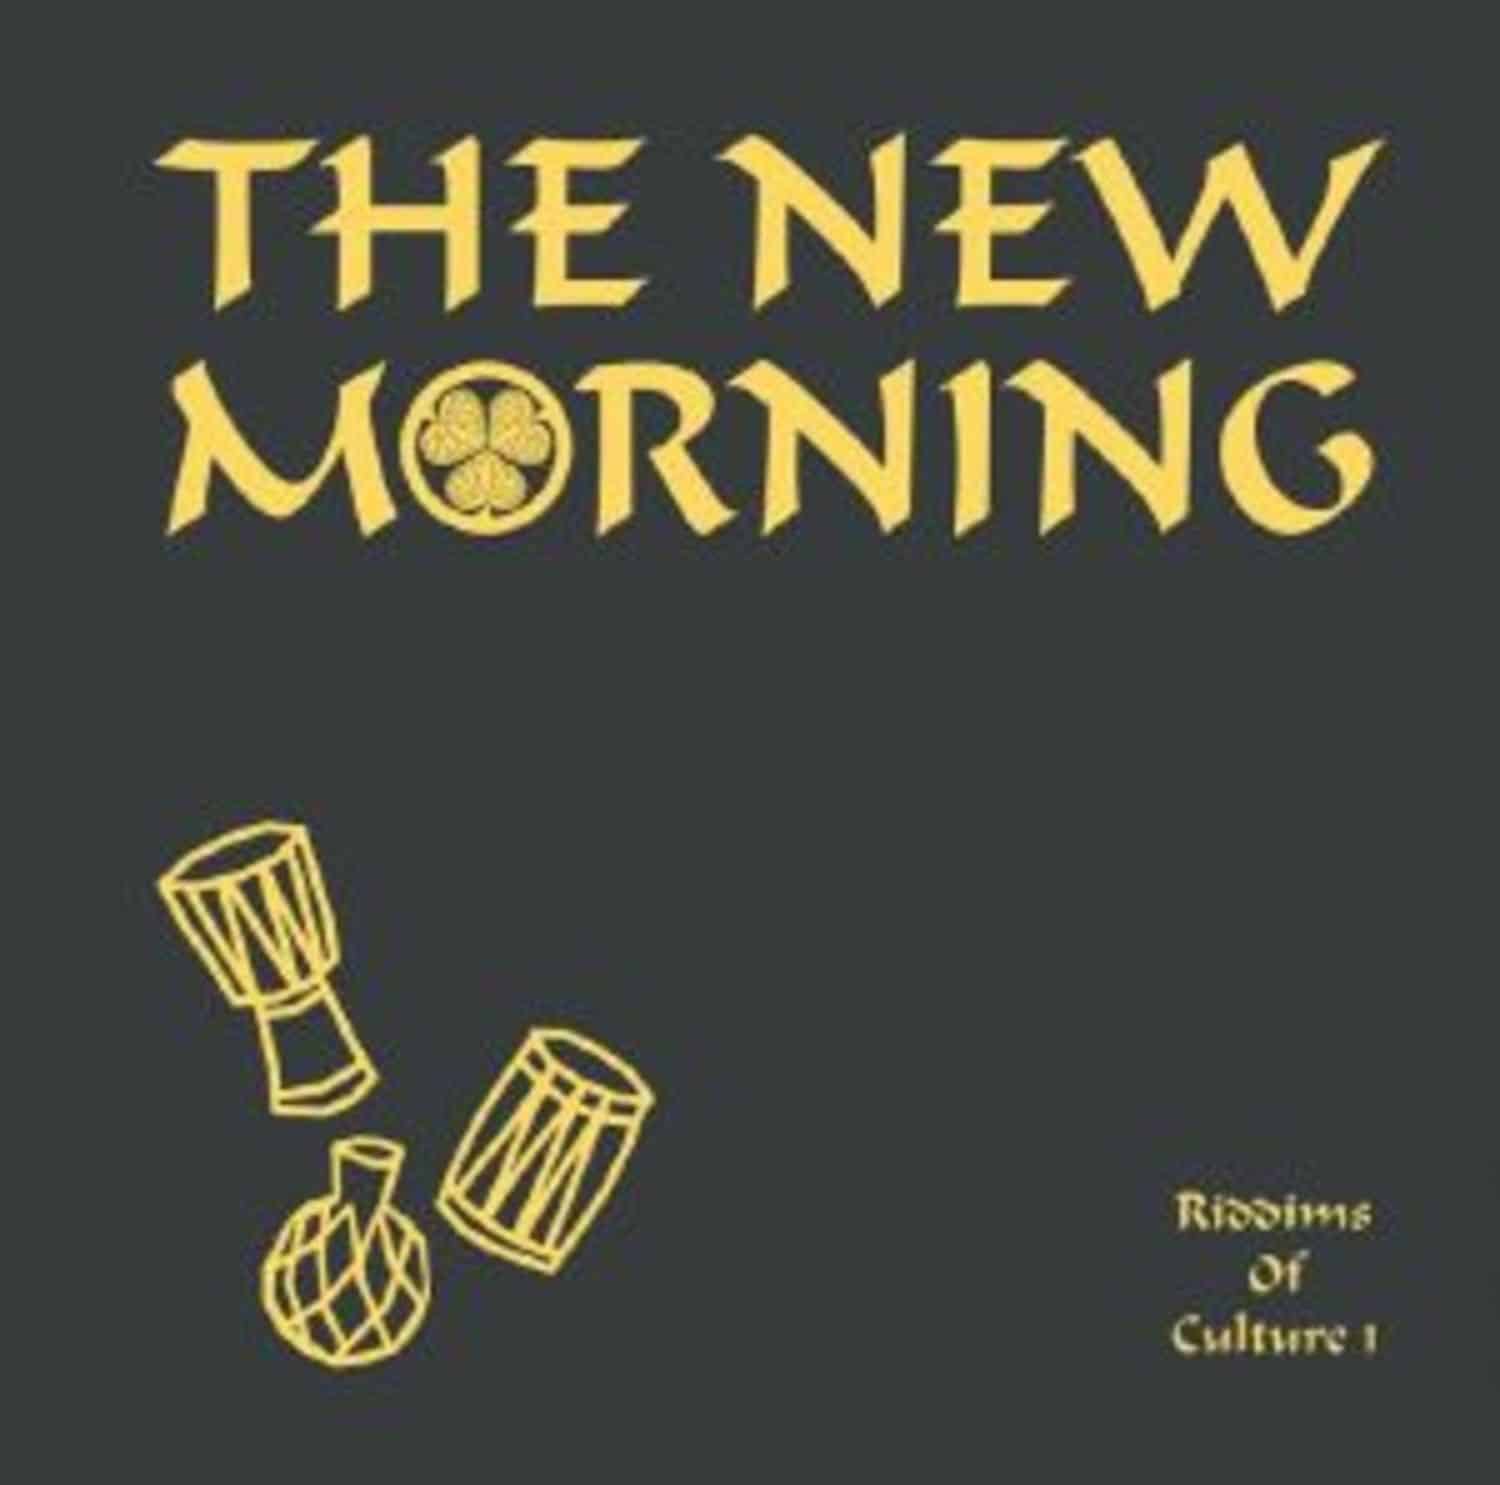 The New Morning - RIDDIMS OF CULTURE 1 